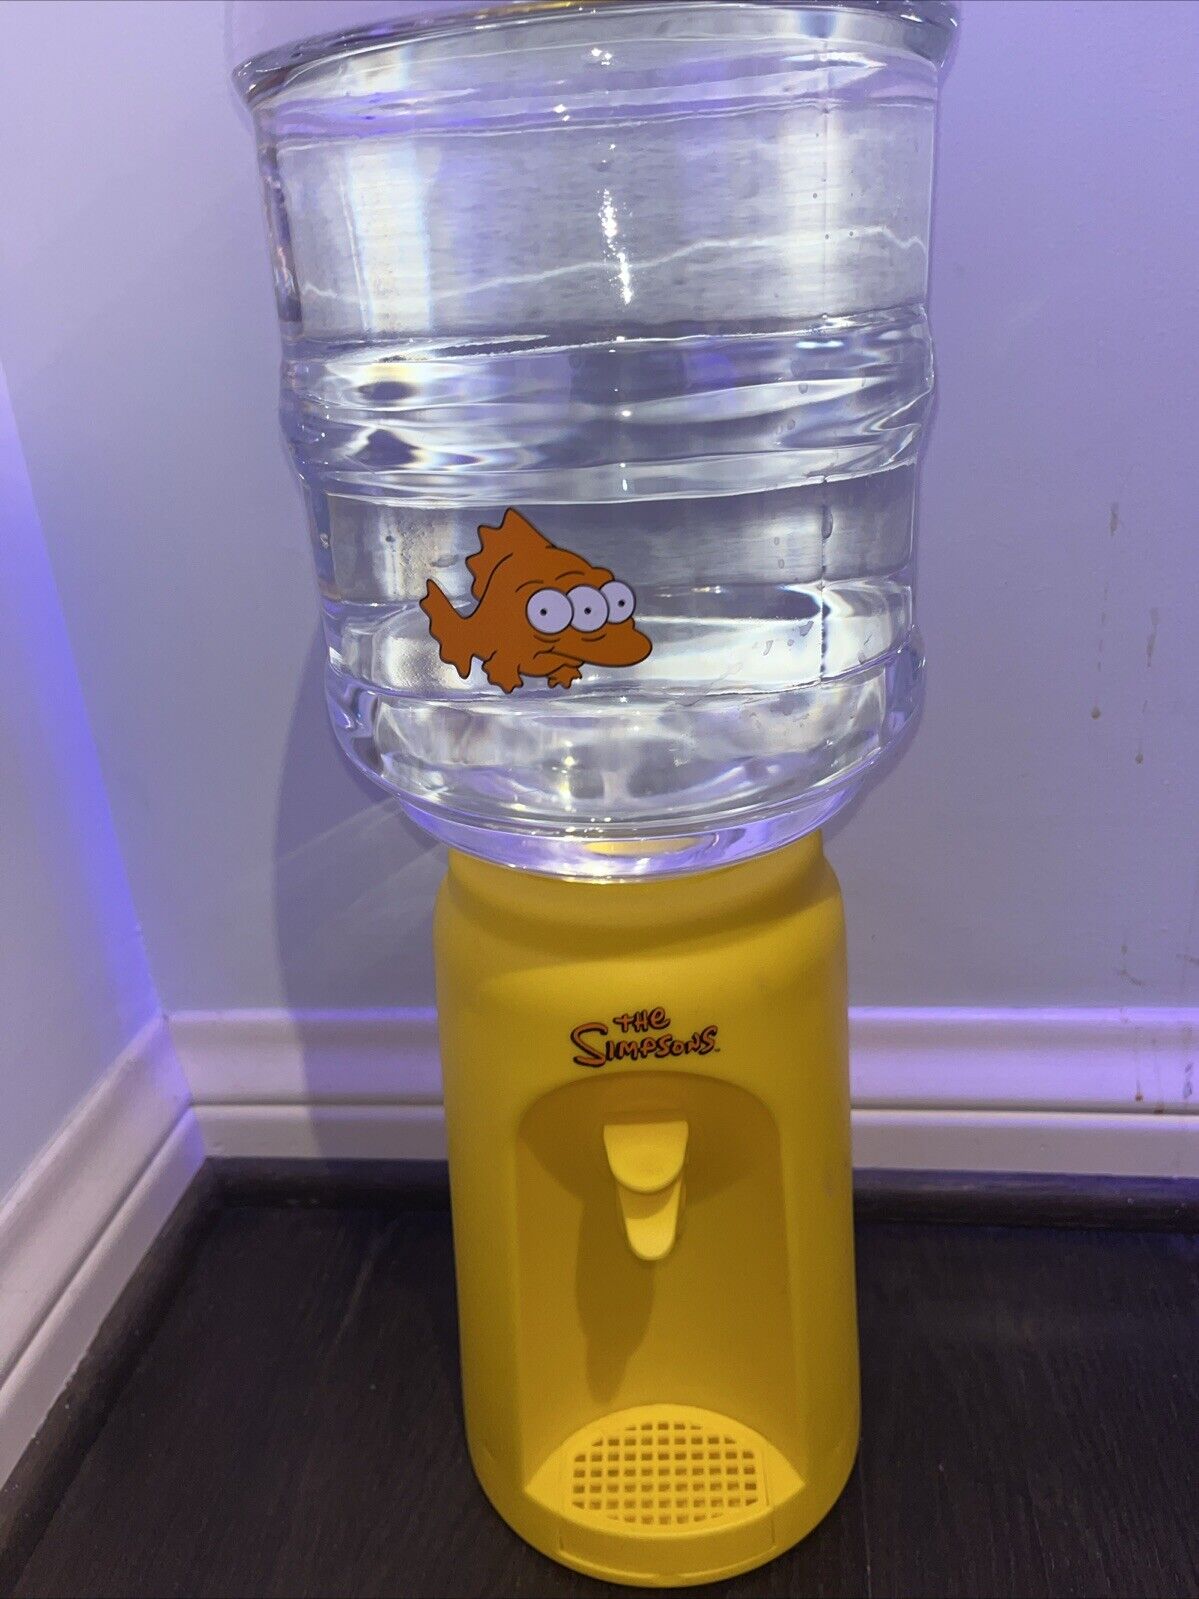 The Simpsons Novelty Water Tank